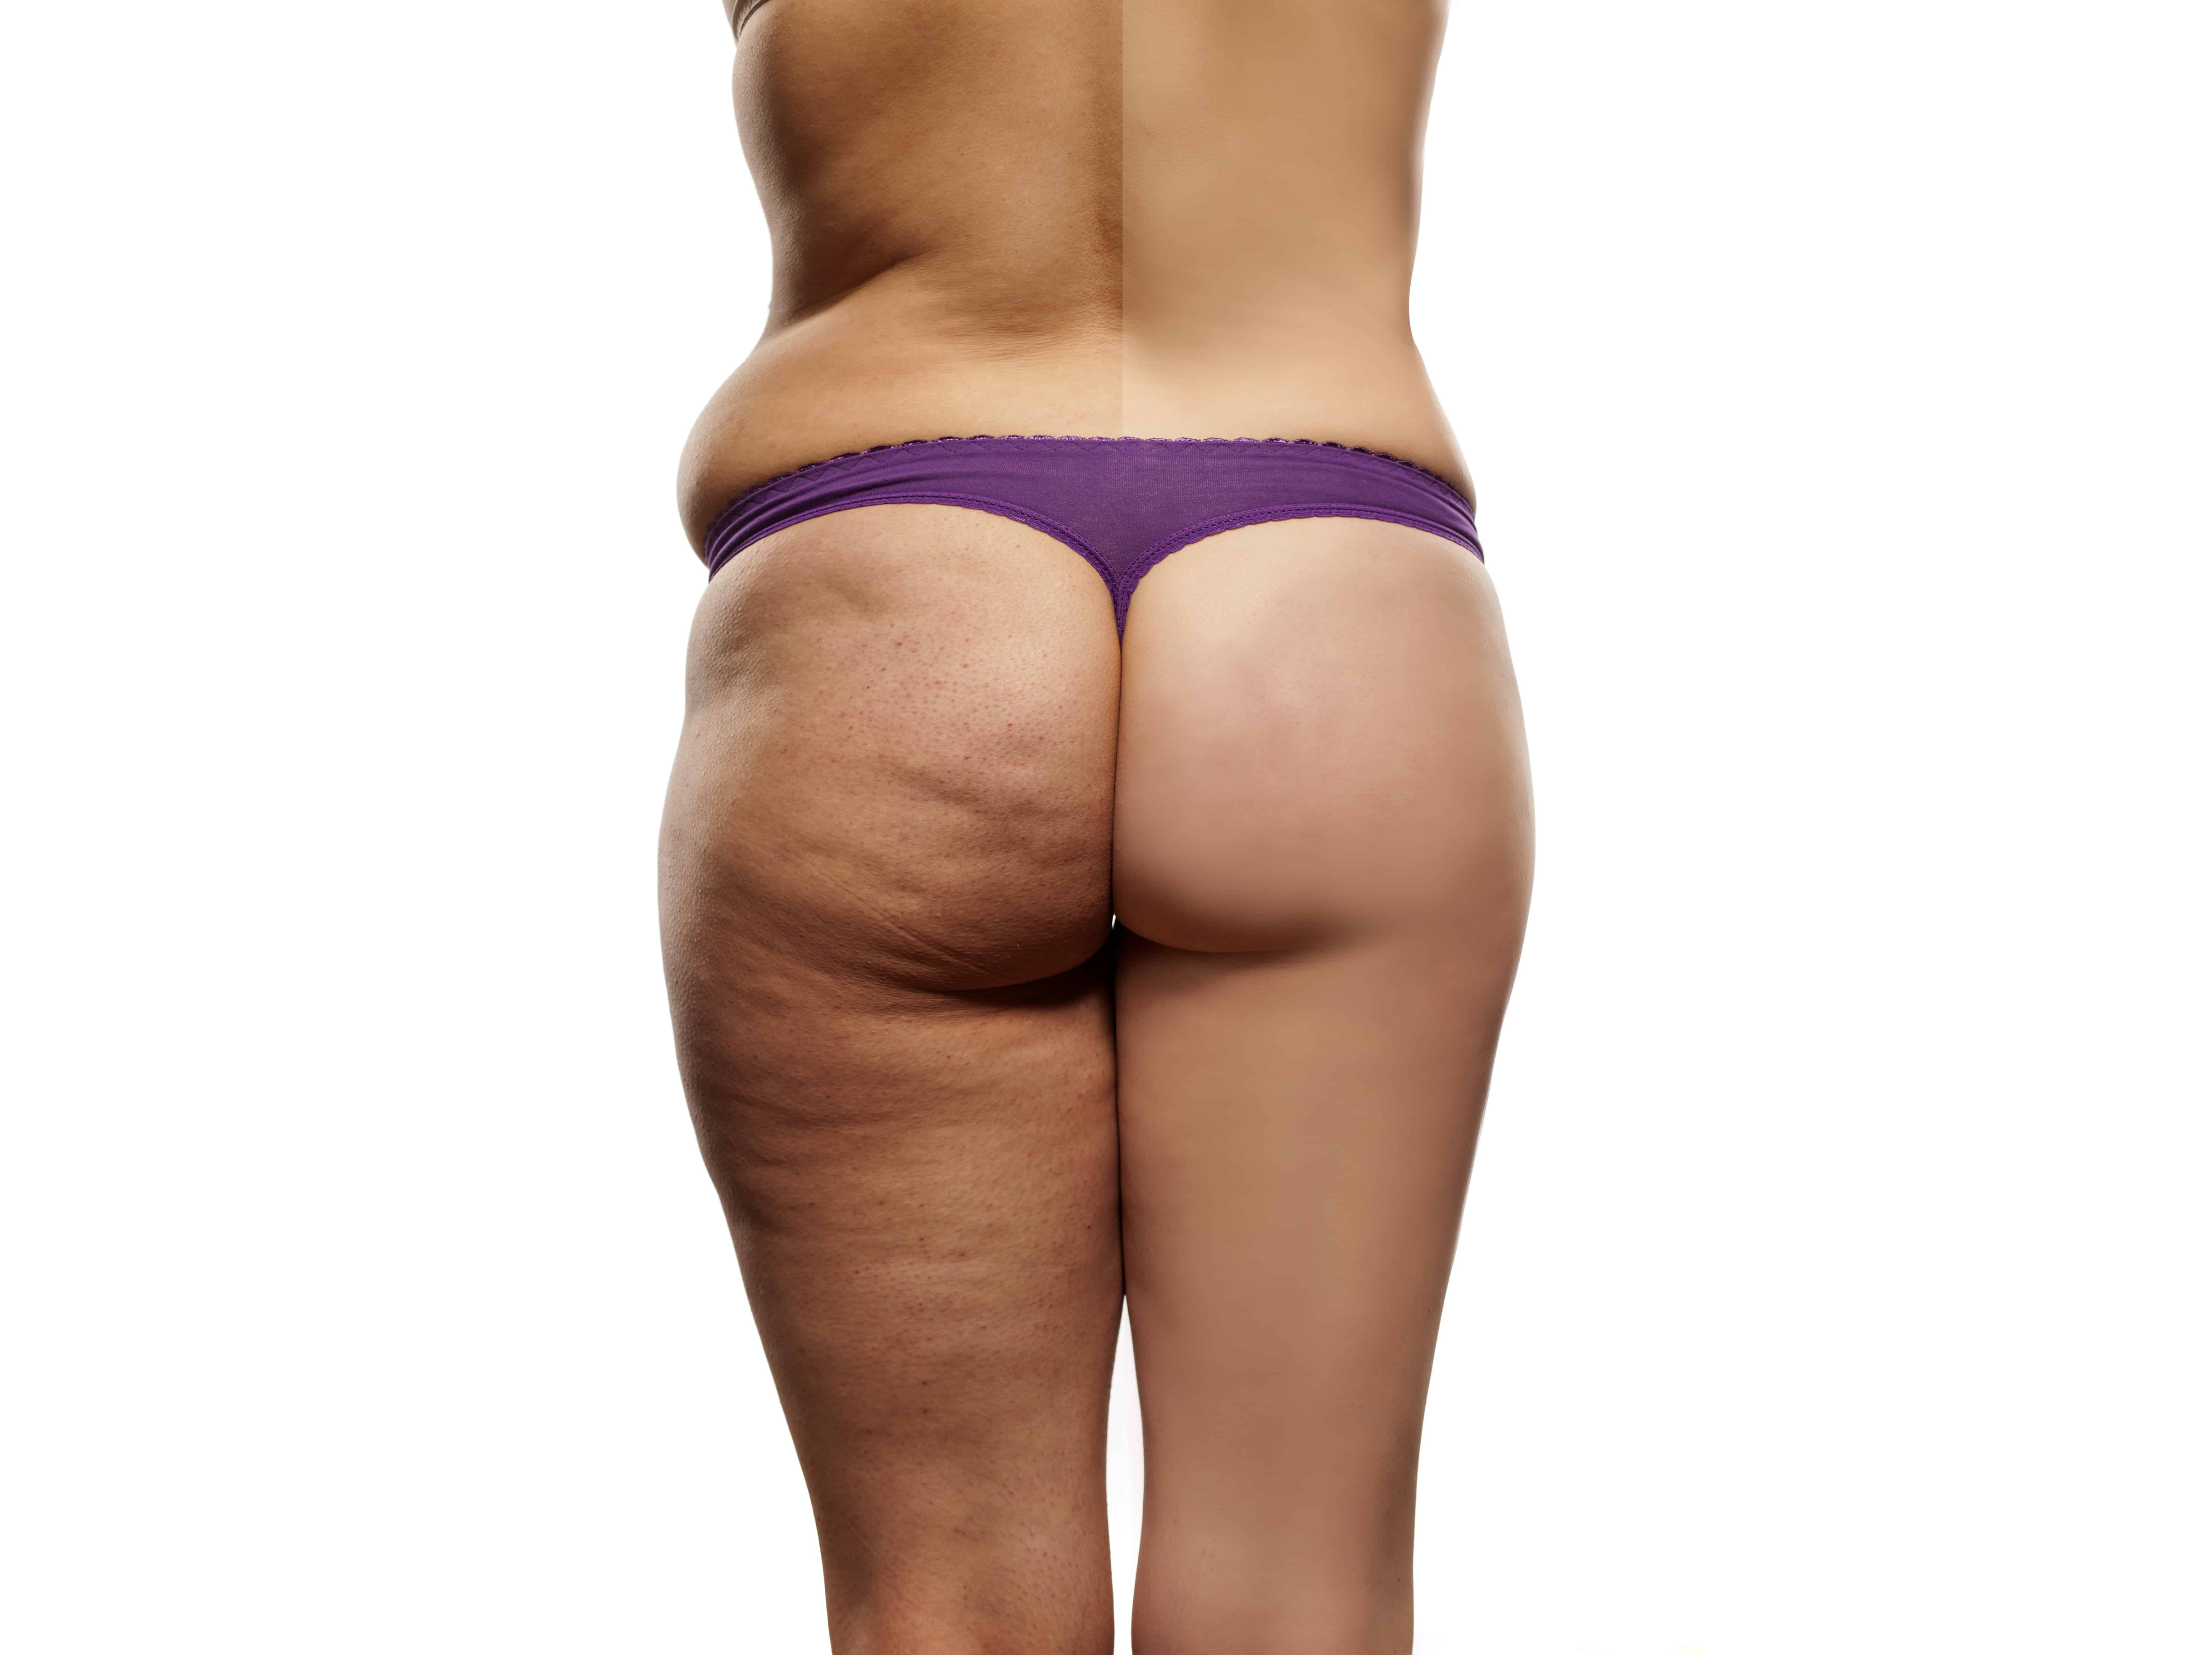 How 15 Myths And Facts About Cellulite - Time can Save You Time, Stress, and Money. thumbnail